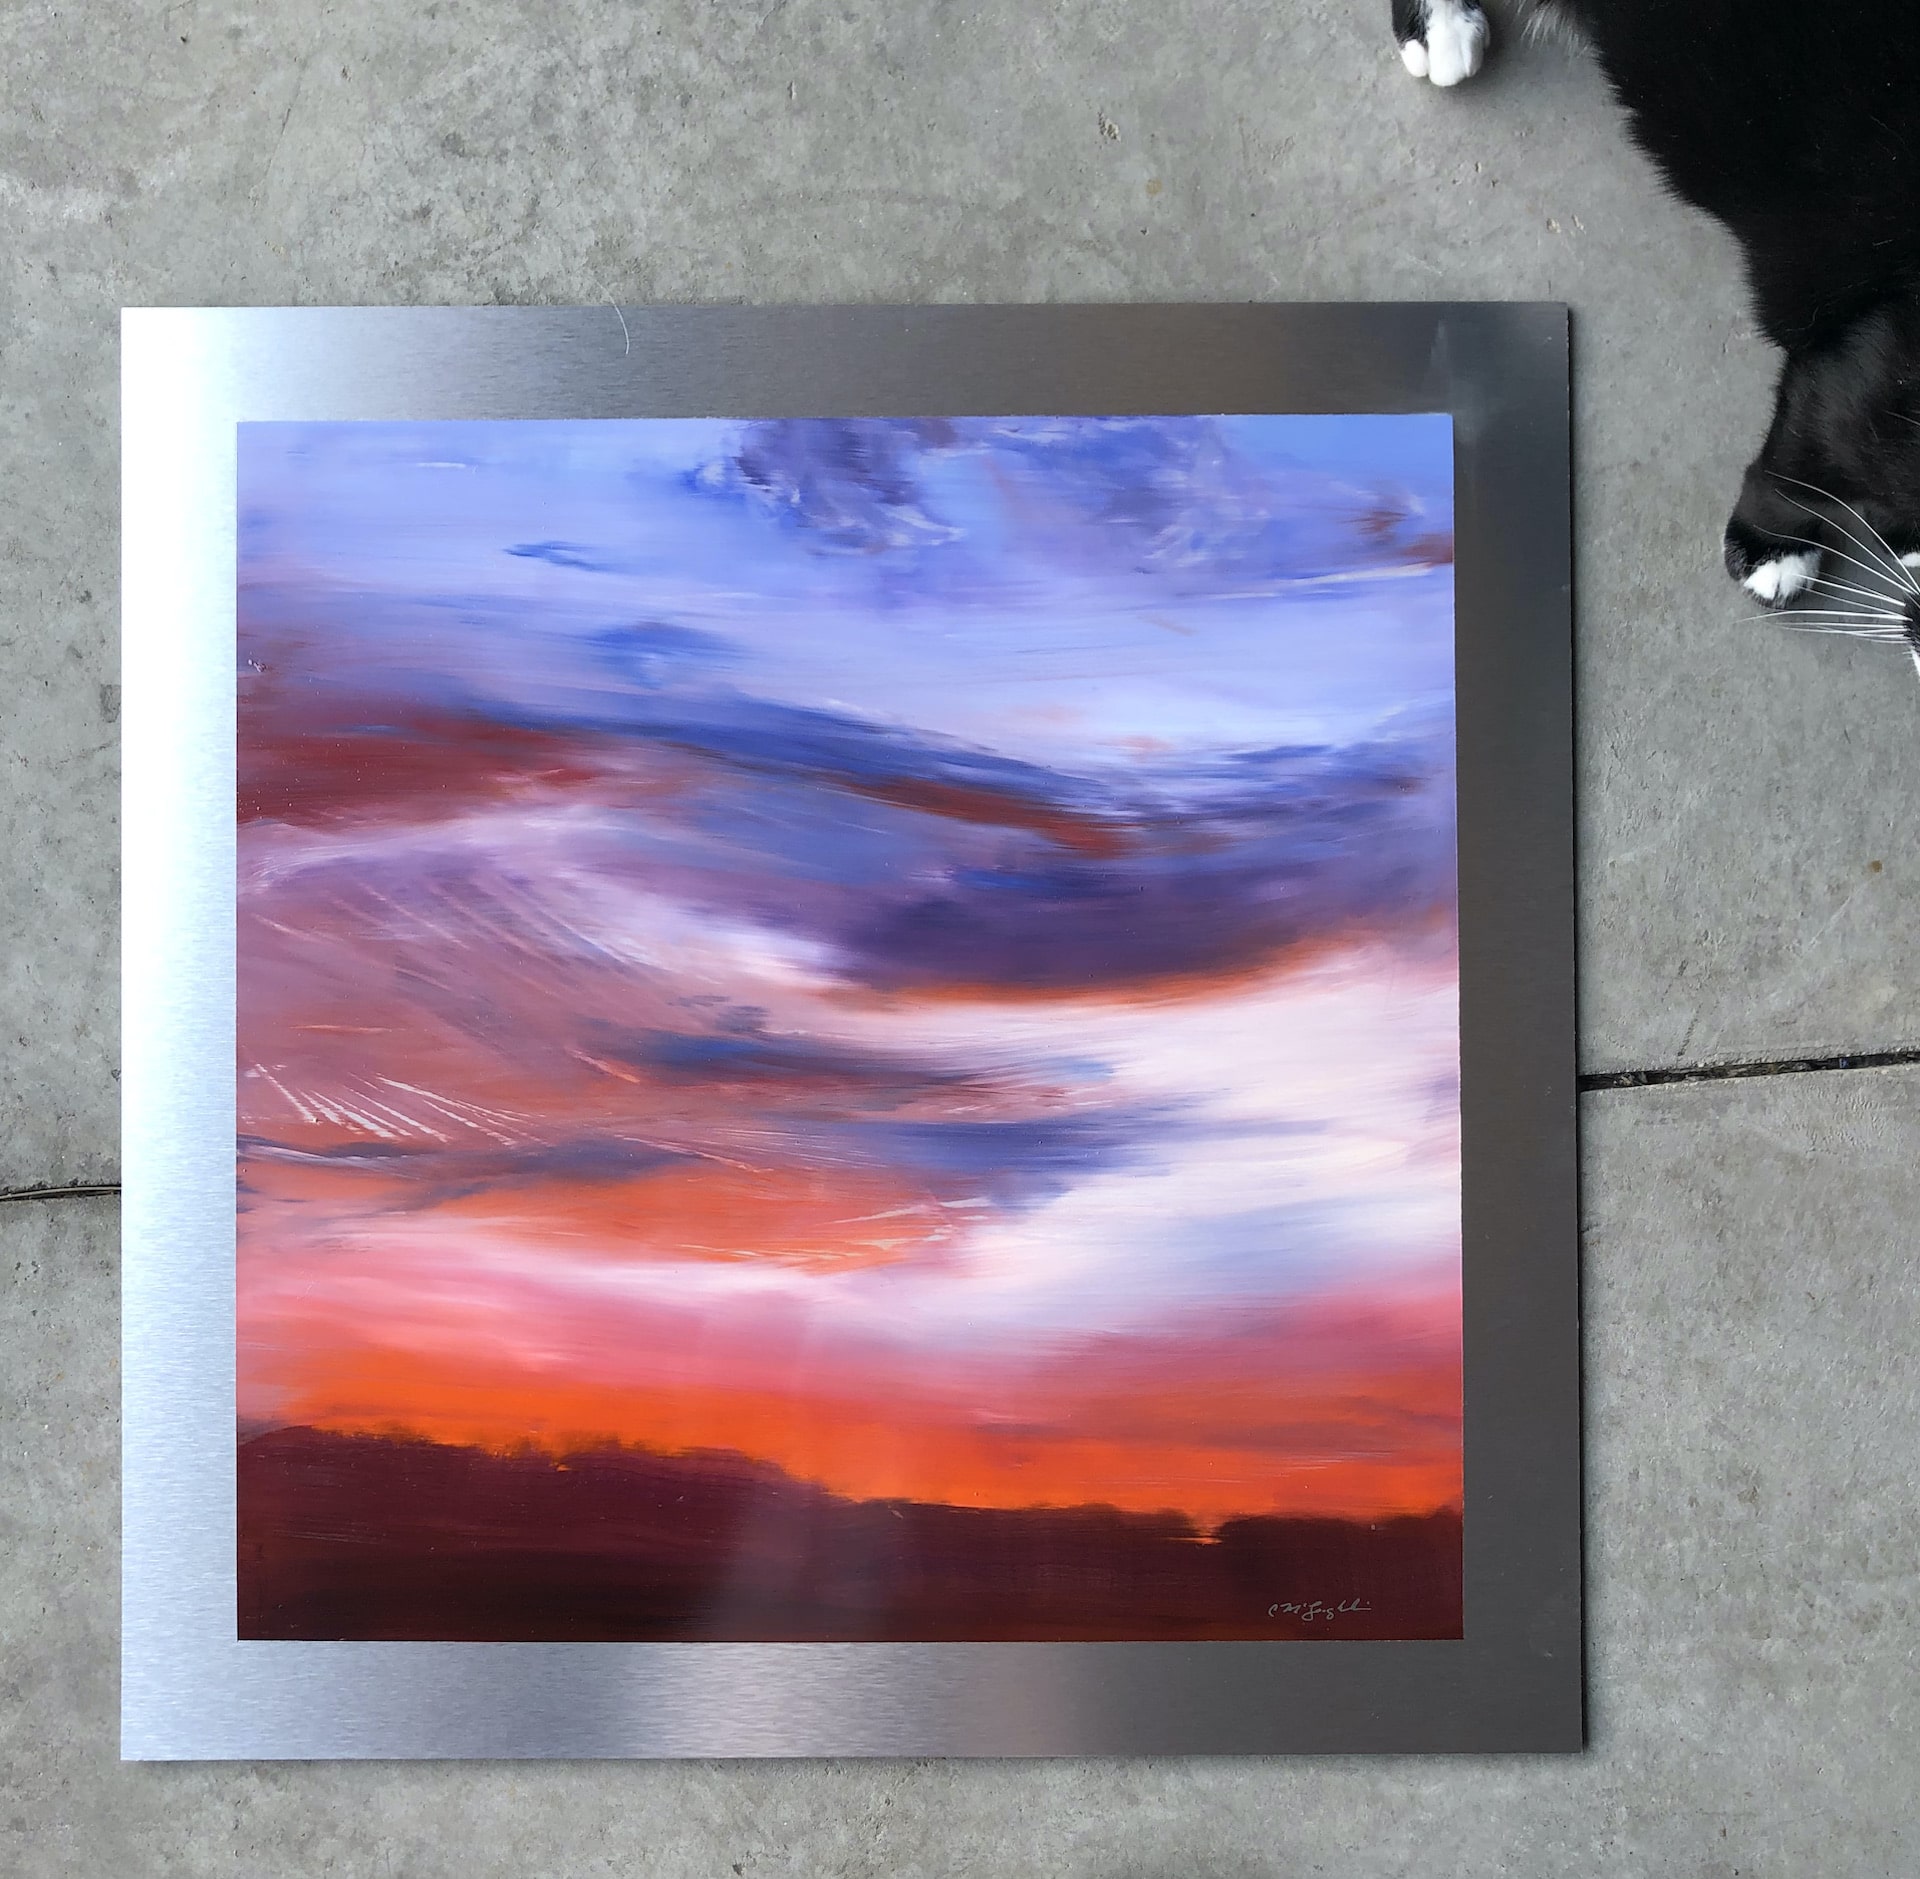 An original cloudscape oil painting on metal panel by artist Cynthia McLoughlin of an orange horizon with wispy blue/purple clouds.